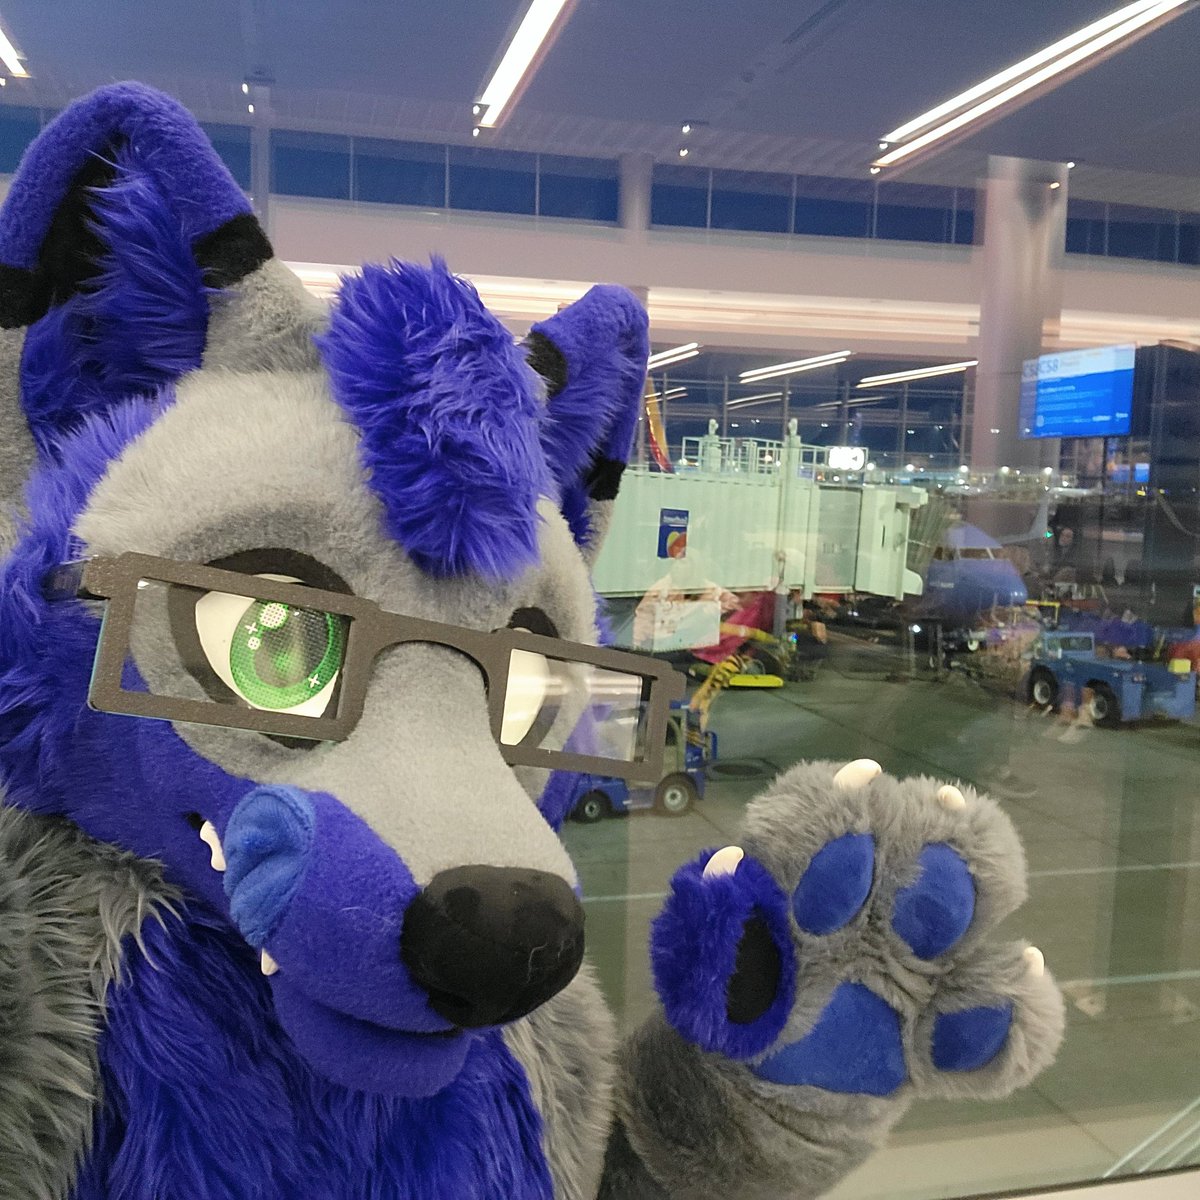 #PDFC2024 here we come! Waiting for our plane with @yukontehhusky. He has to deal with my weirdness hehe
#SouthWest #SouthWestAirlines